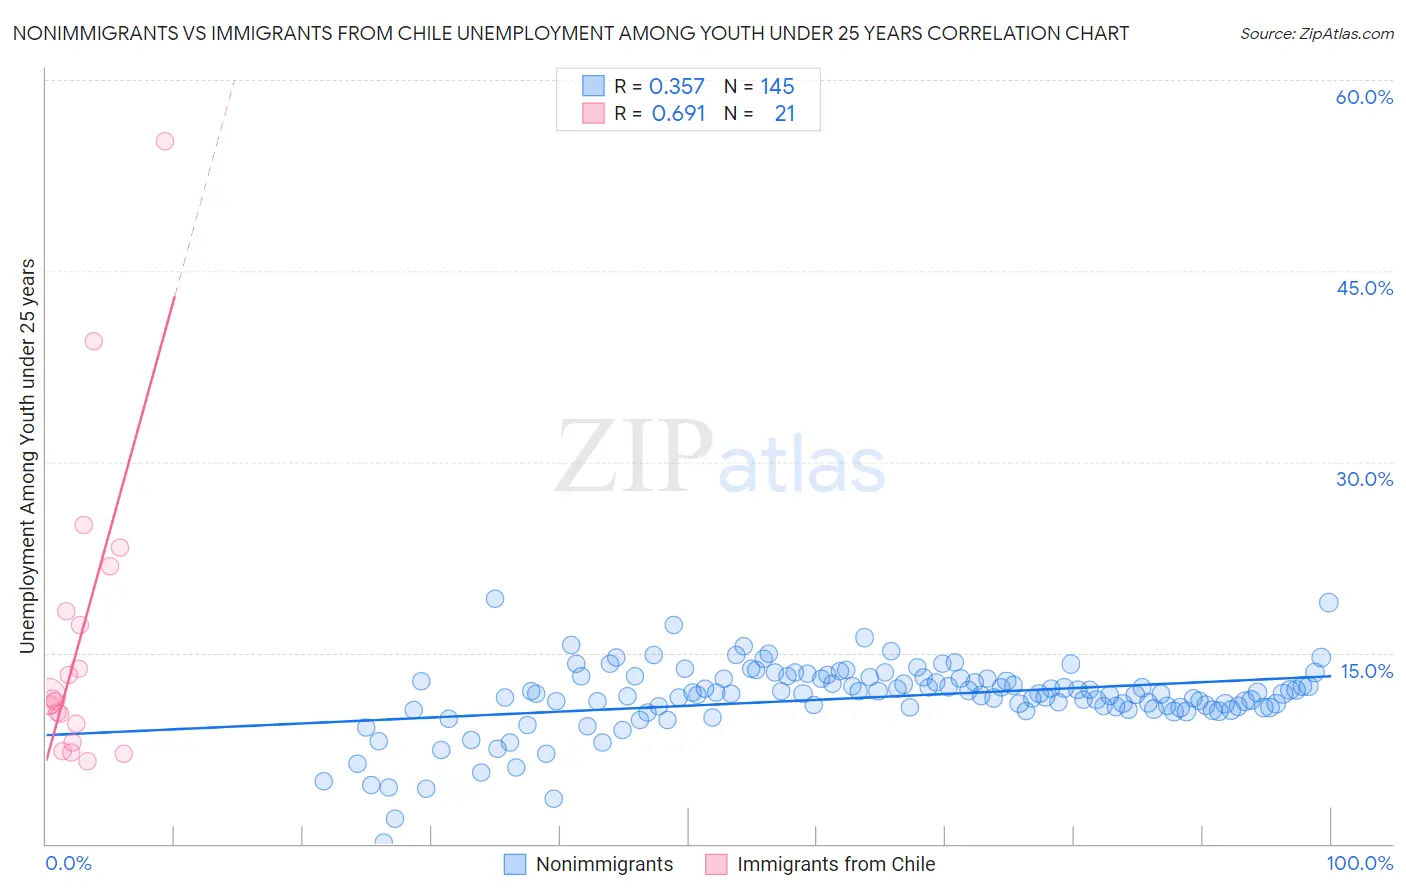 Nonimmigrants vs Immigrants from Chile Unemployment Among Youth under 25 years